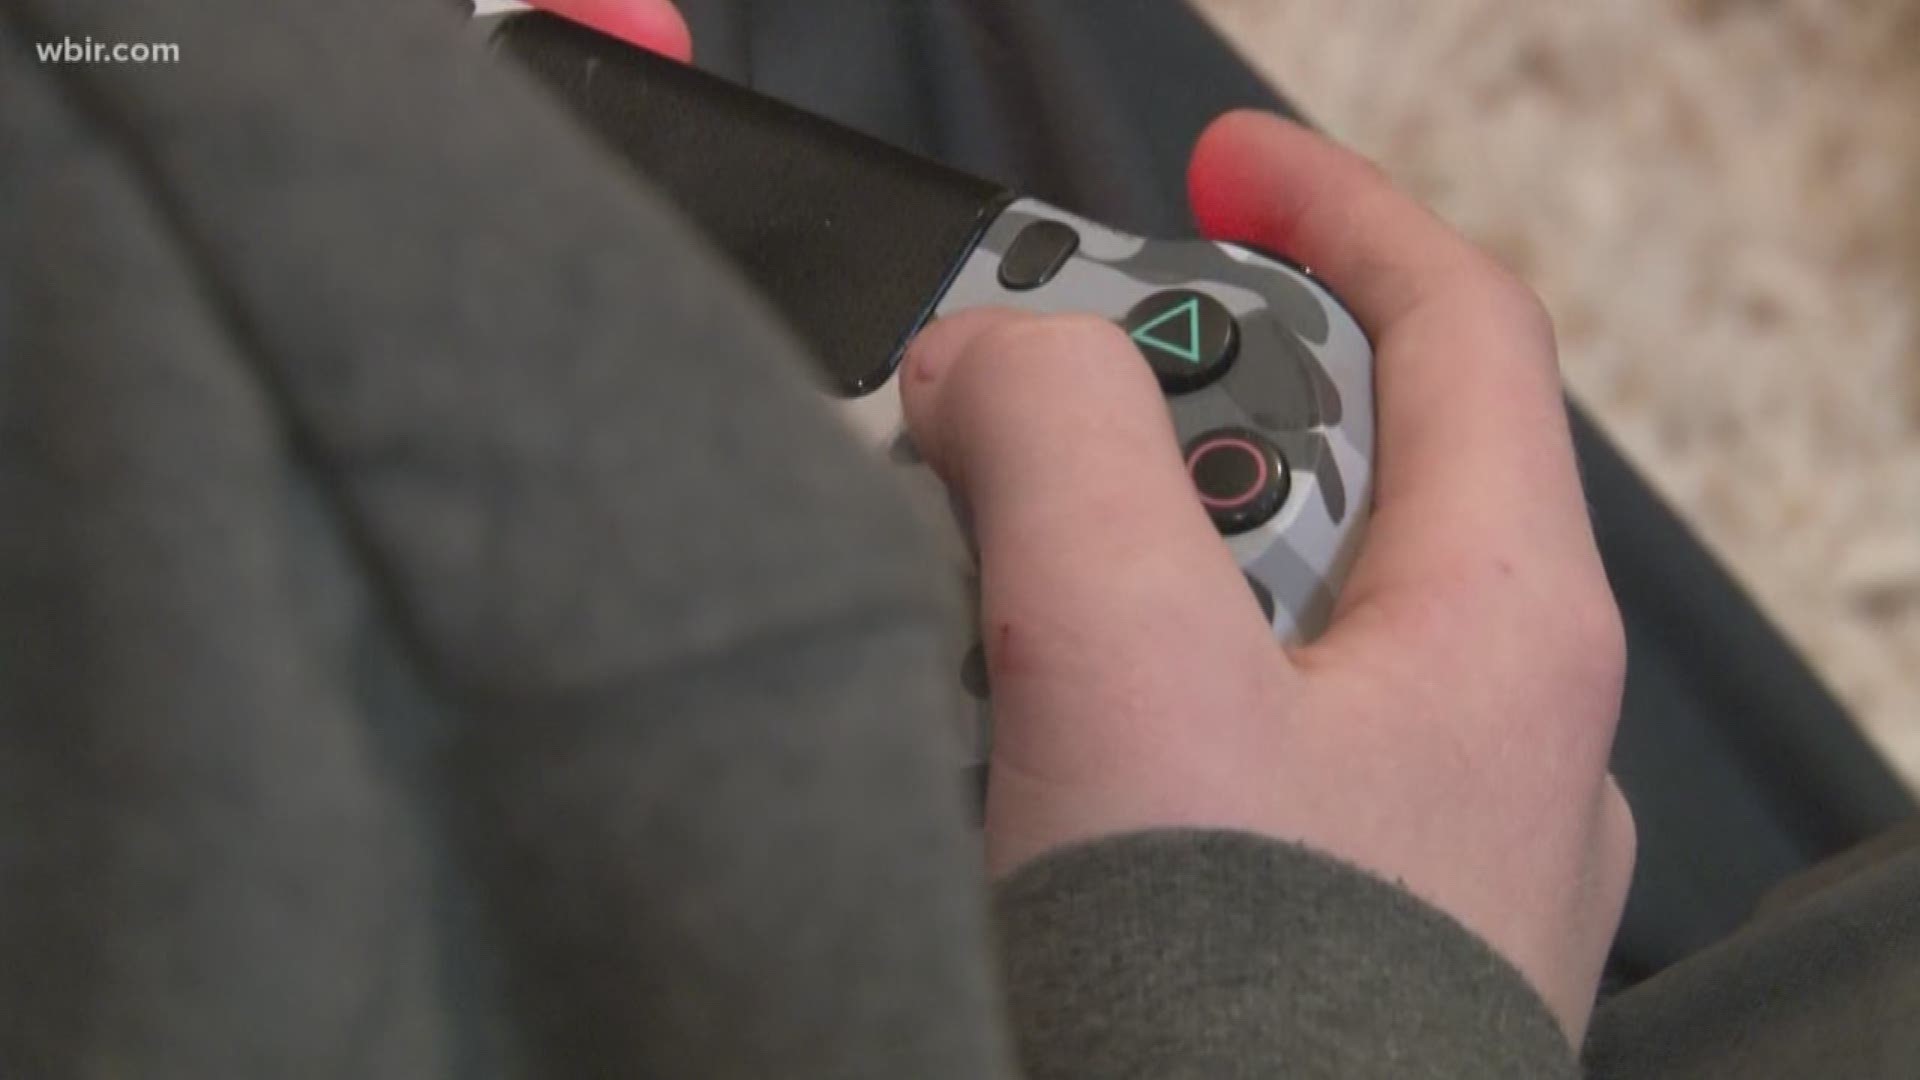 People who spend countless hours playing video games could soon be diagnosed with a mental health disorder.